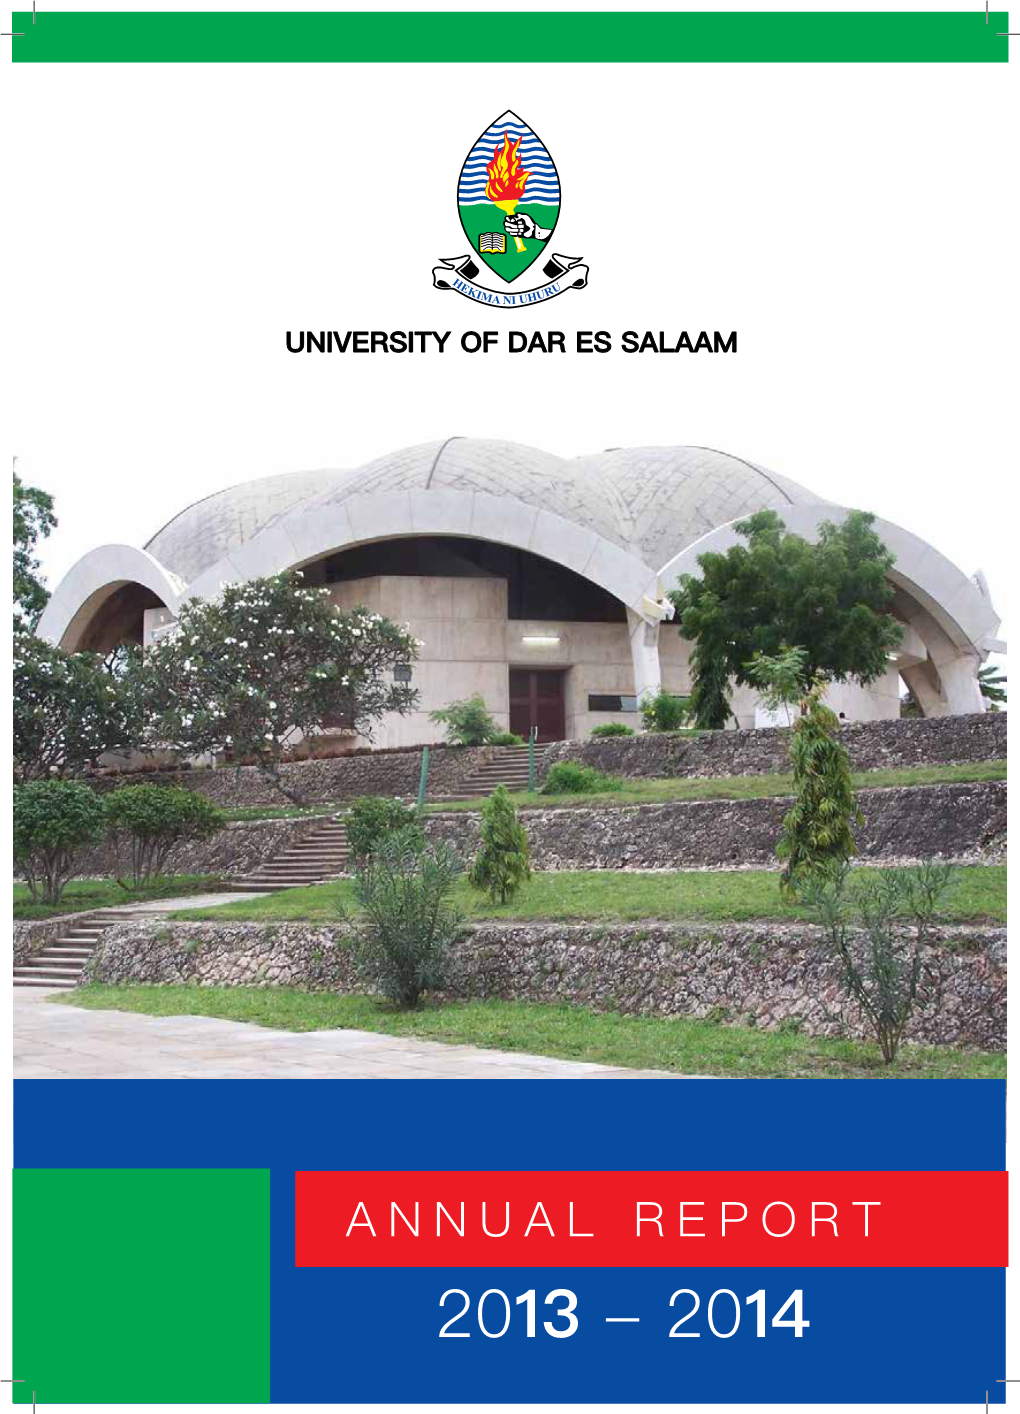 Annual Report 2013/14 Highlights